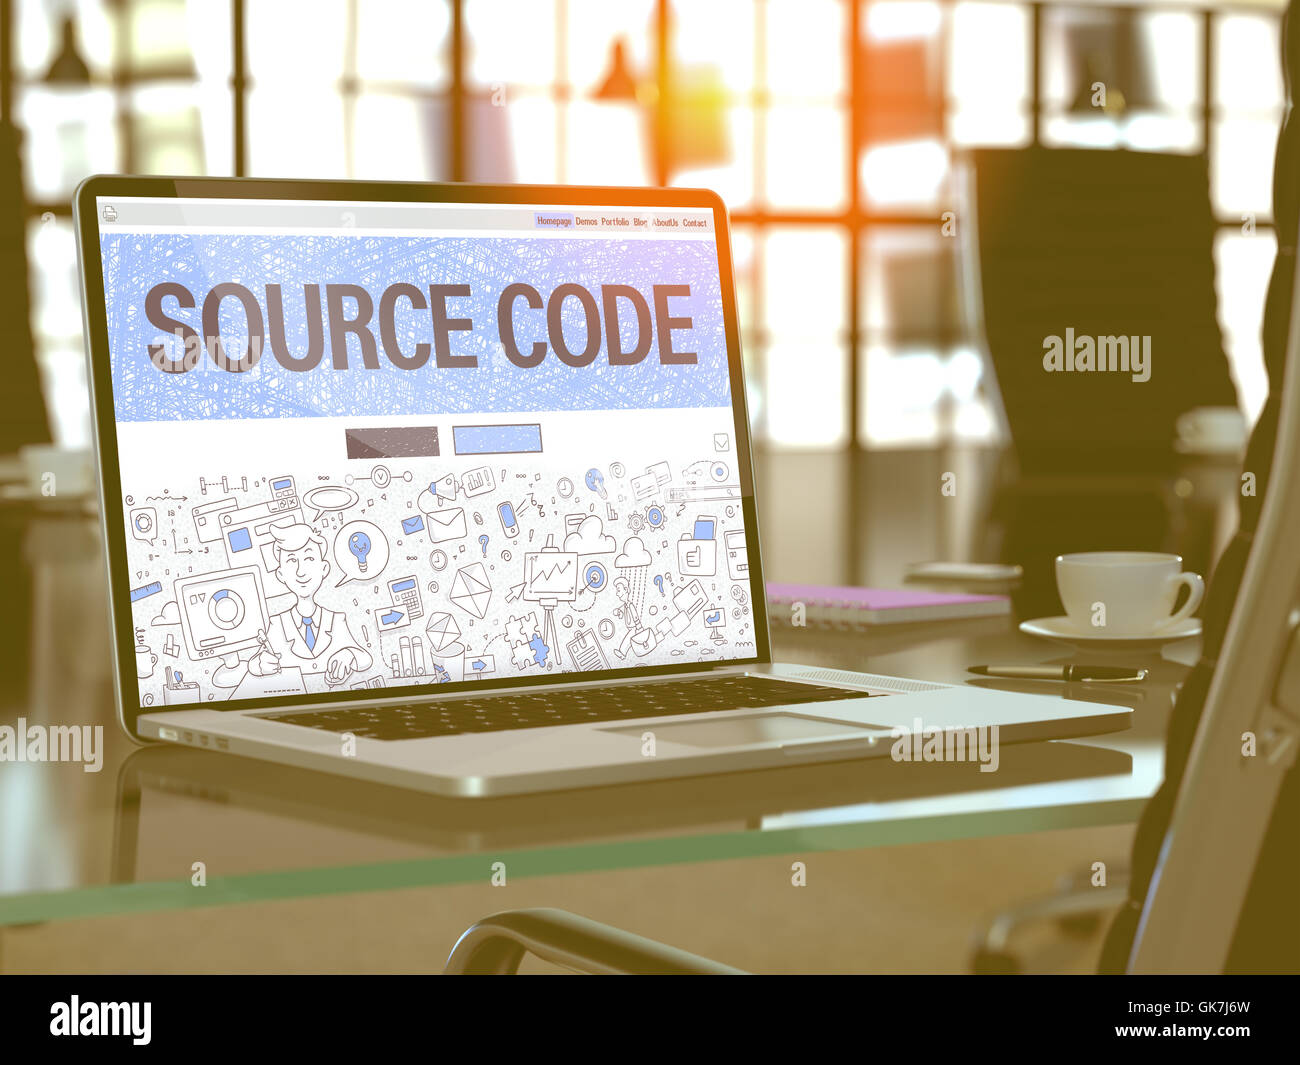 Source Code - Concept on Laptop Screen. Stock Photo